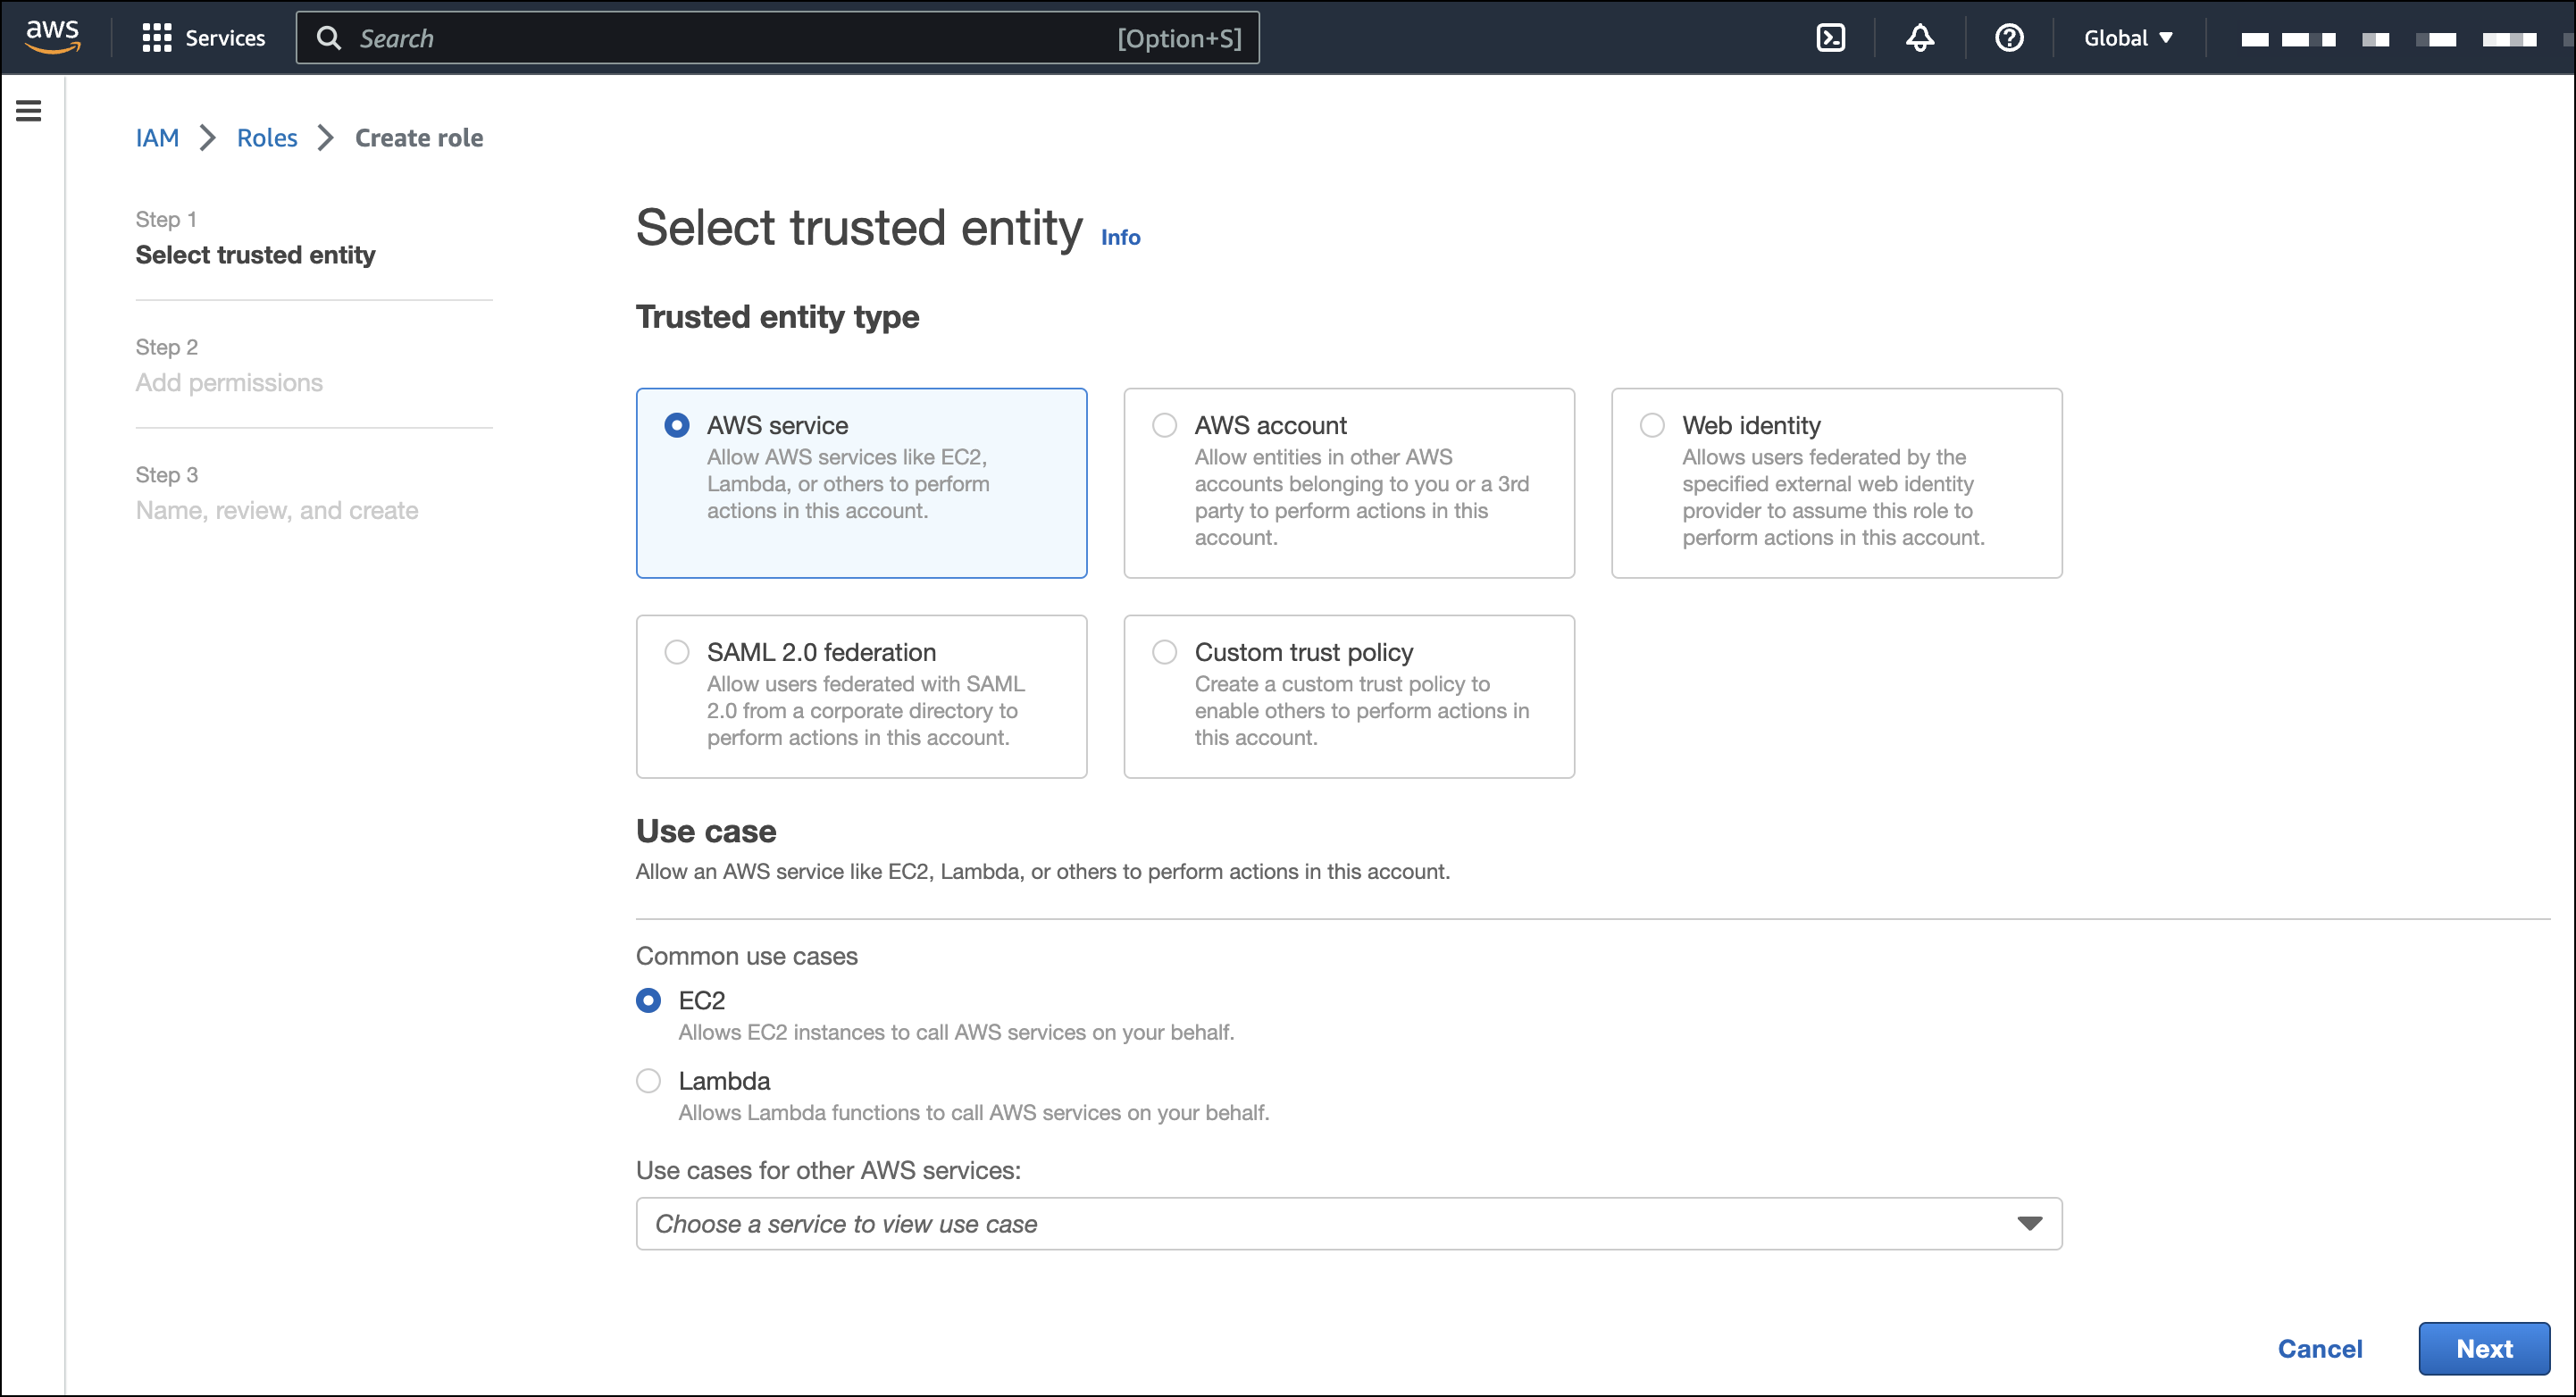 The Select trusted entity screen in AWS